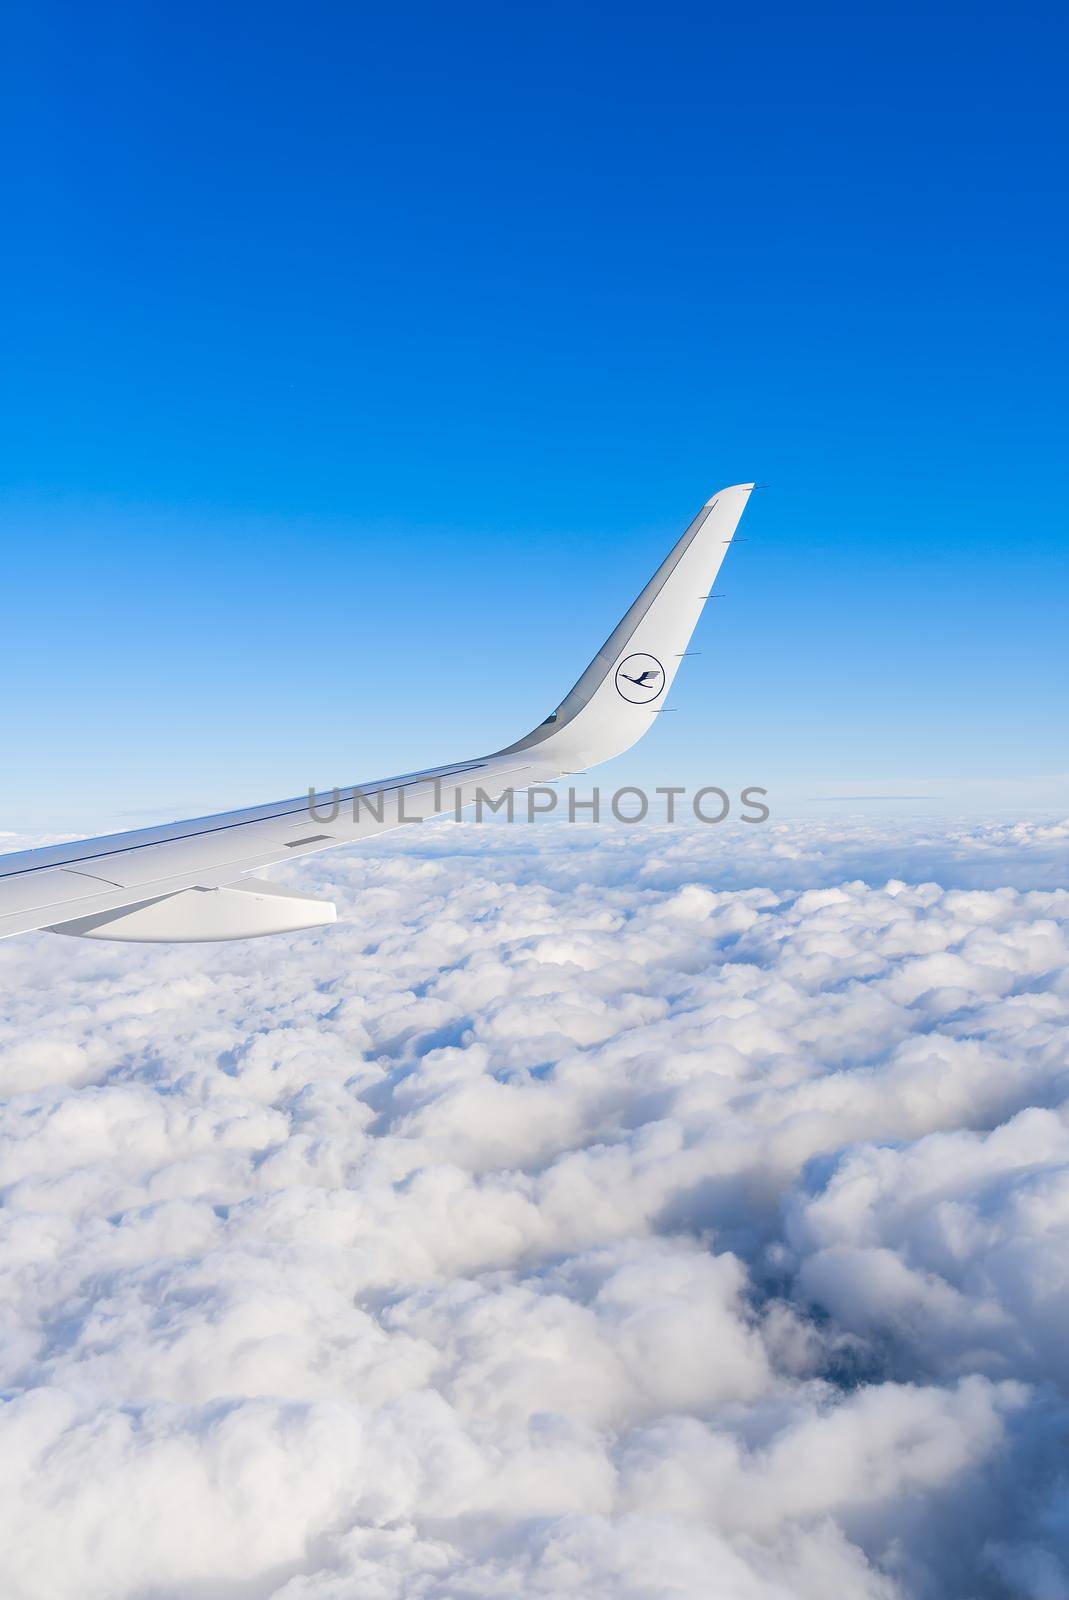 22.05.2021 Frankfurt, Germany - The Airbus A321 wing with Lufthansa airline logo and blue sky over clouds background. airplane wing in sunny day